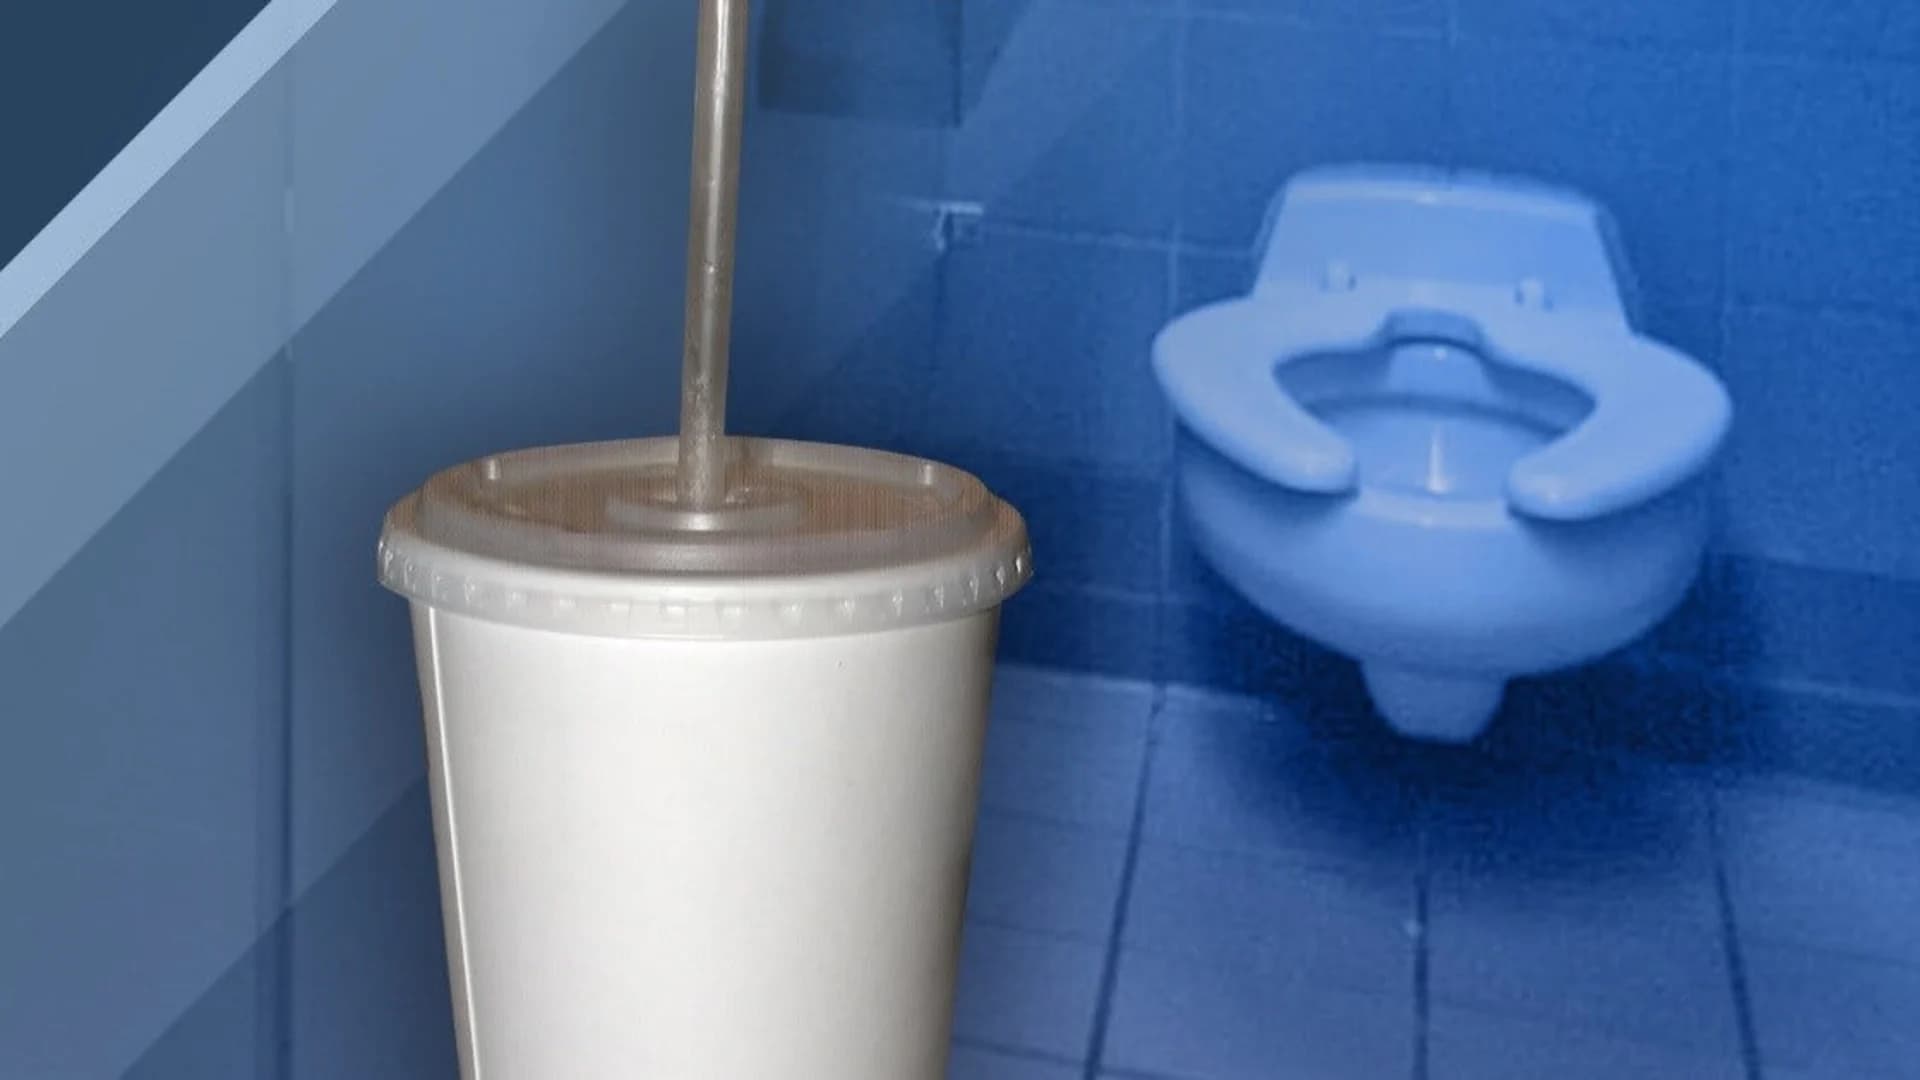 13-year-old student accused of putting toilet water in fellow student's drink